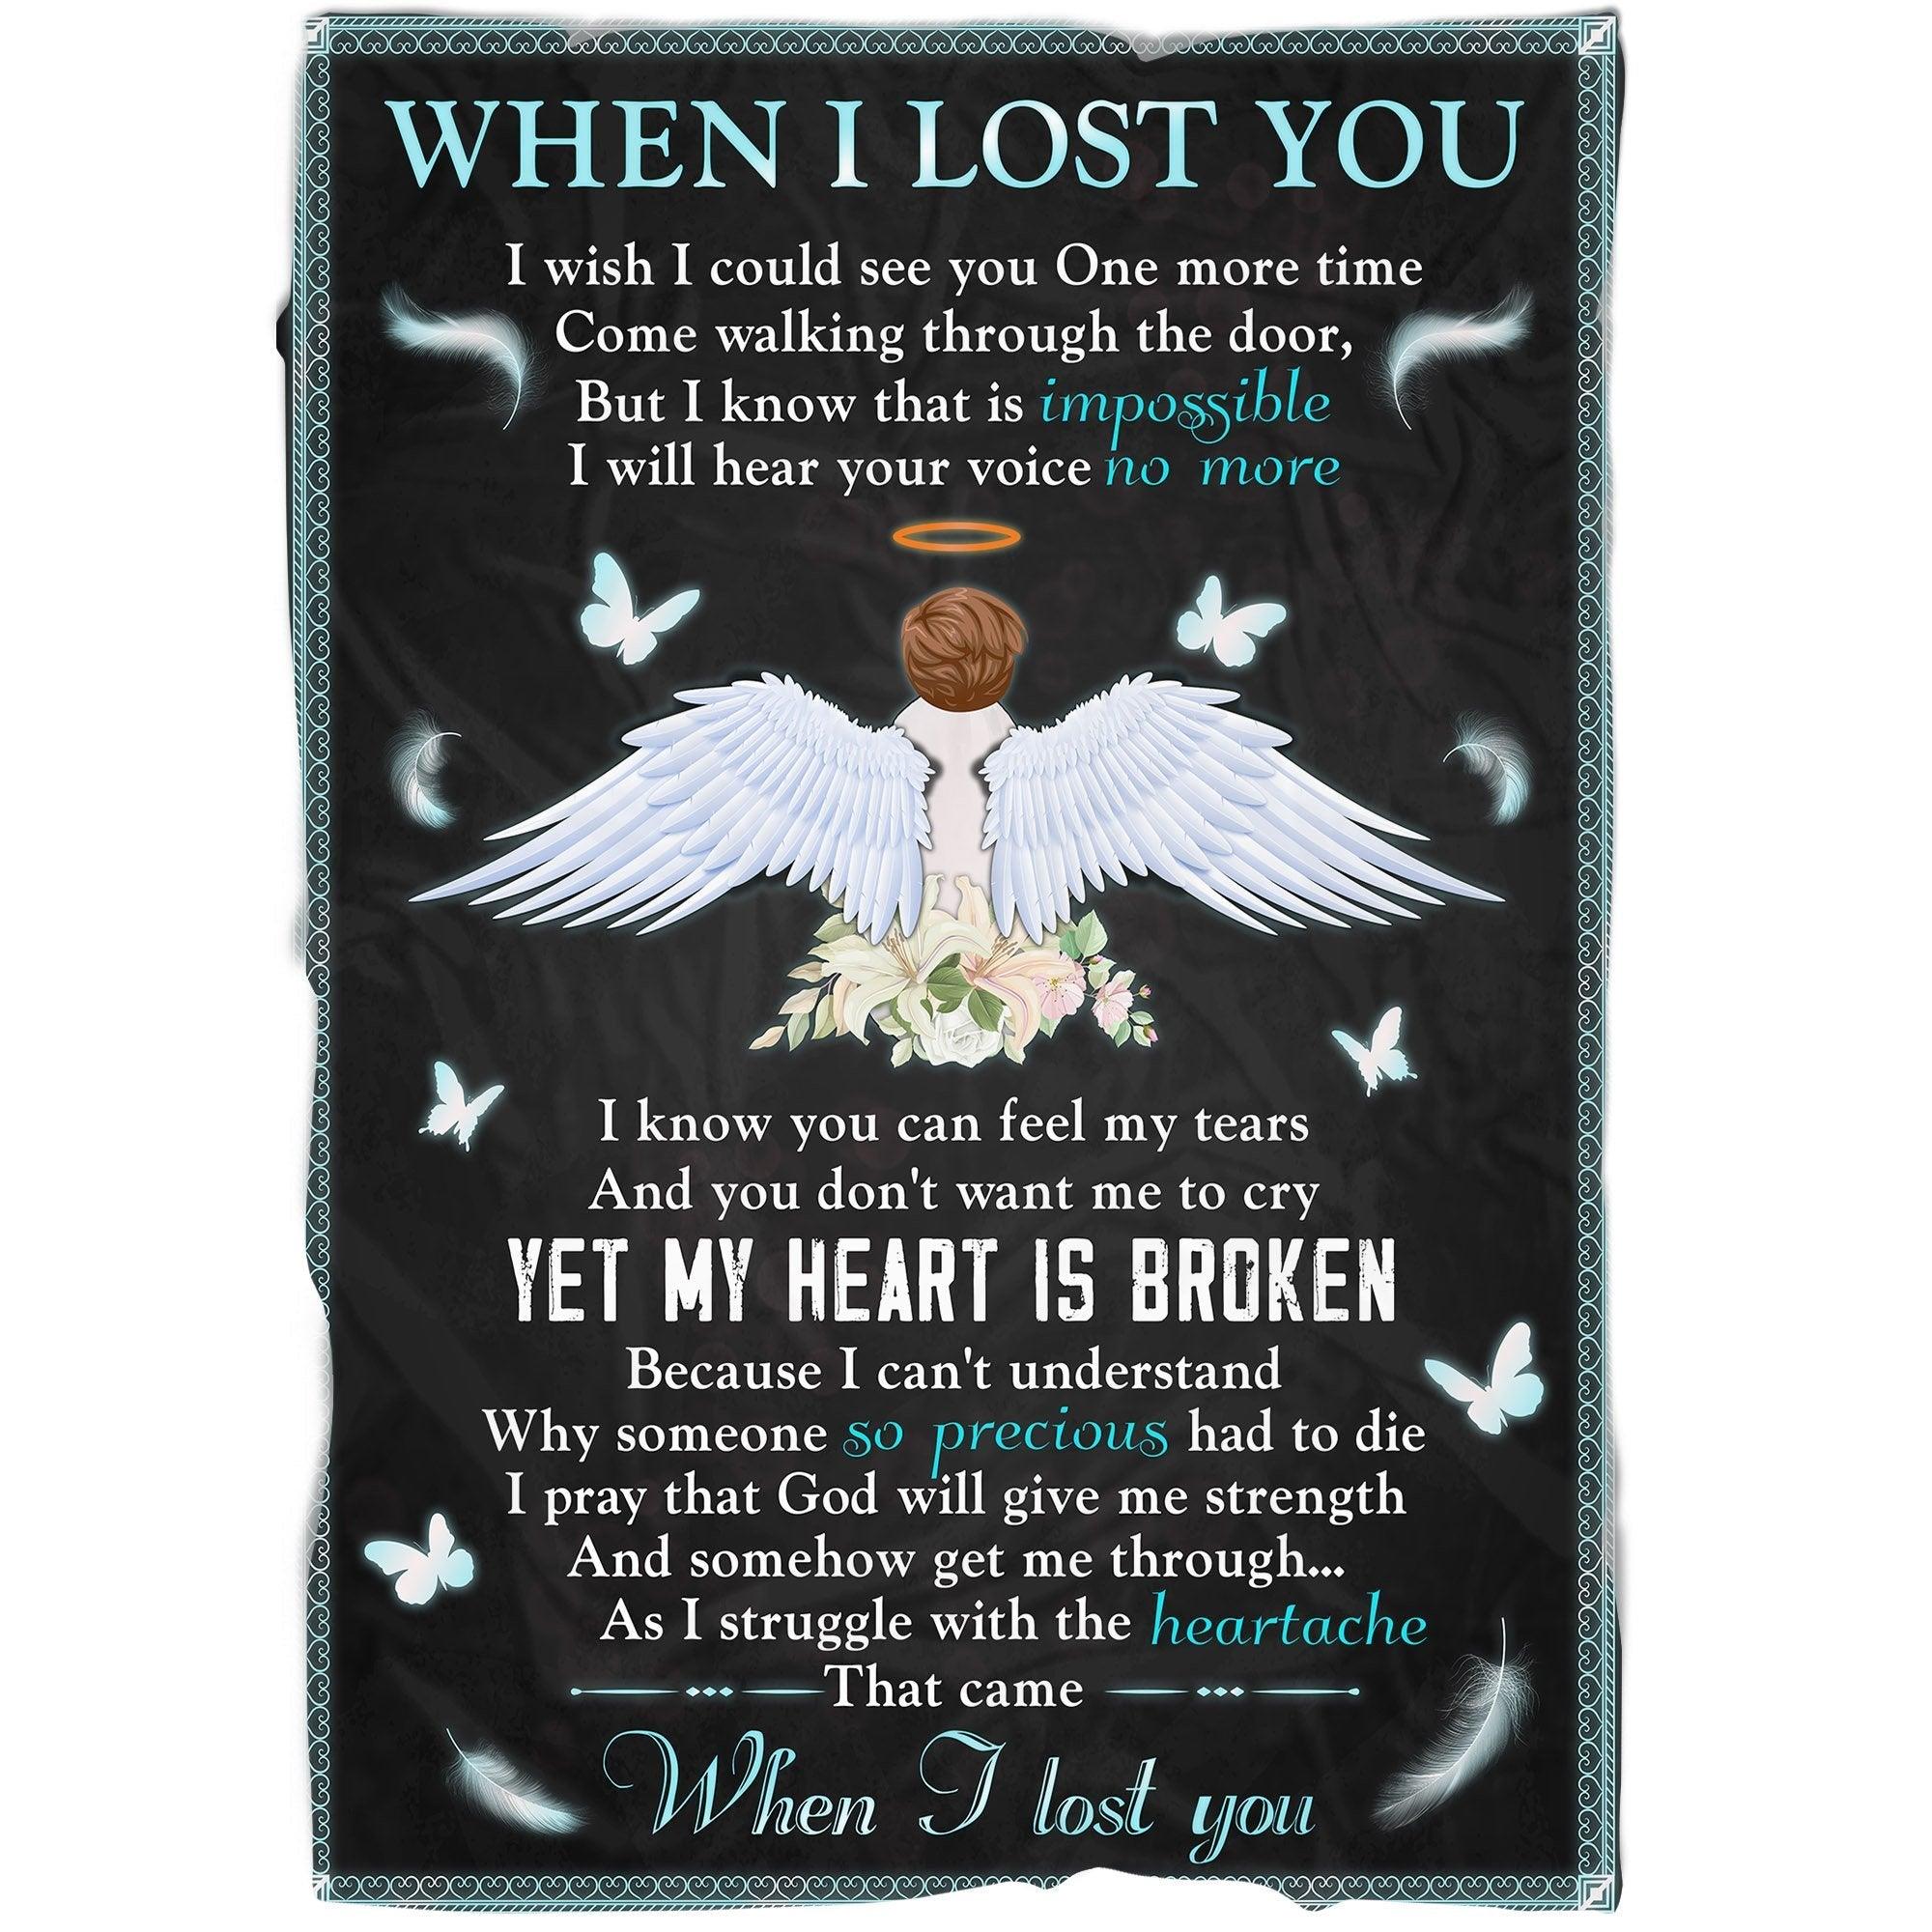 Memorial Blanket - When I Lost You, Angel Wings Memorial Fleece Blanket Home Decor Bedding Couch Sofa Soft And Comfy Cozy, Memorial Gift